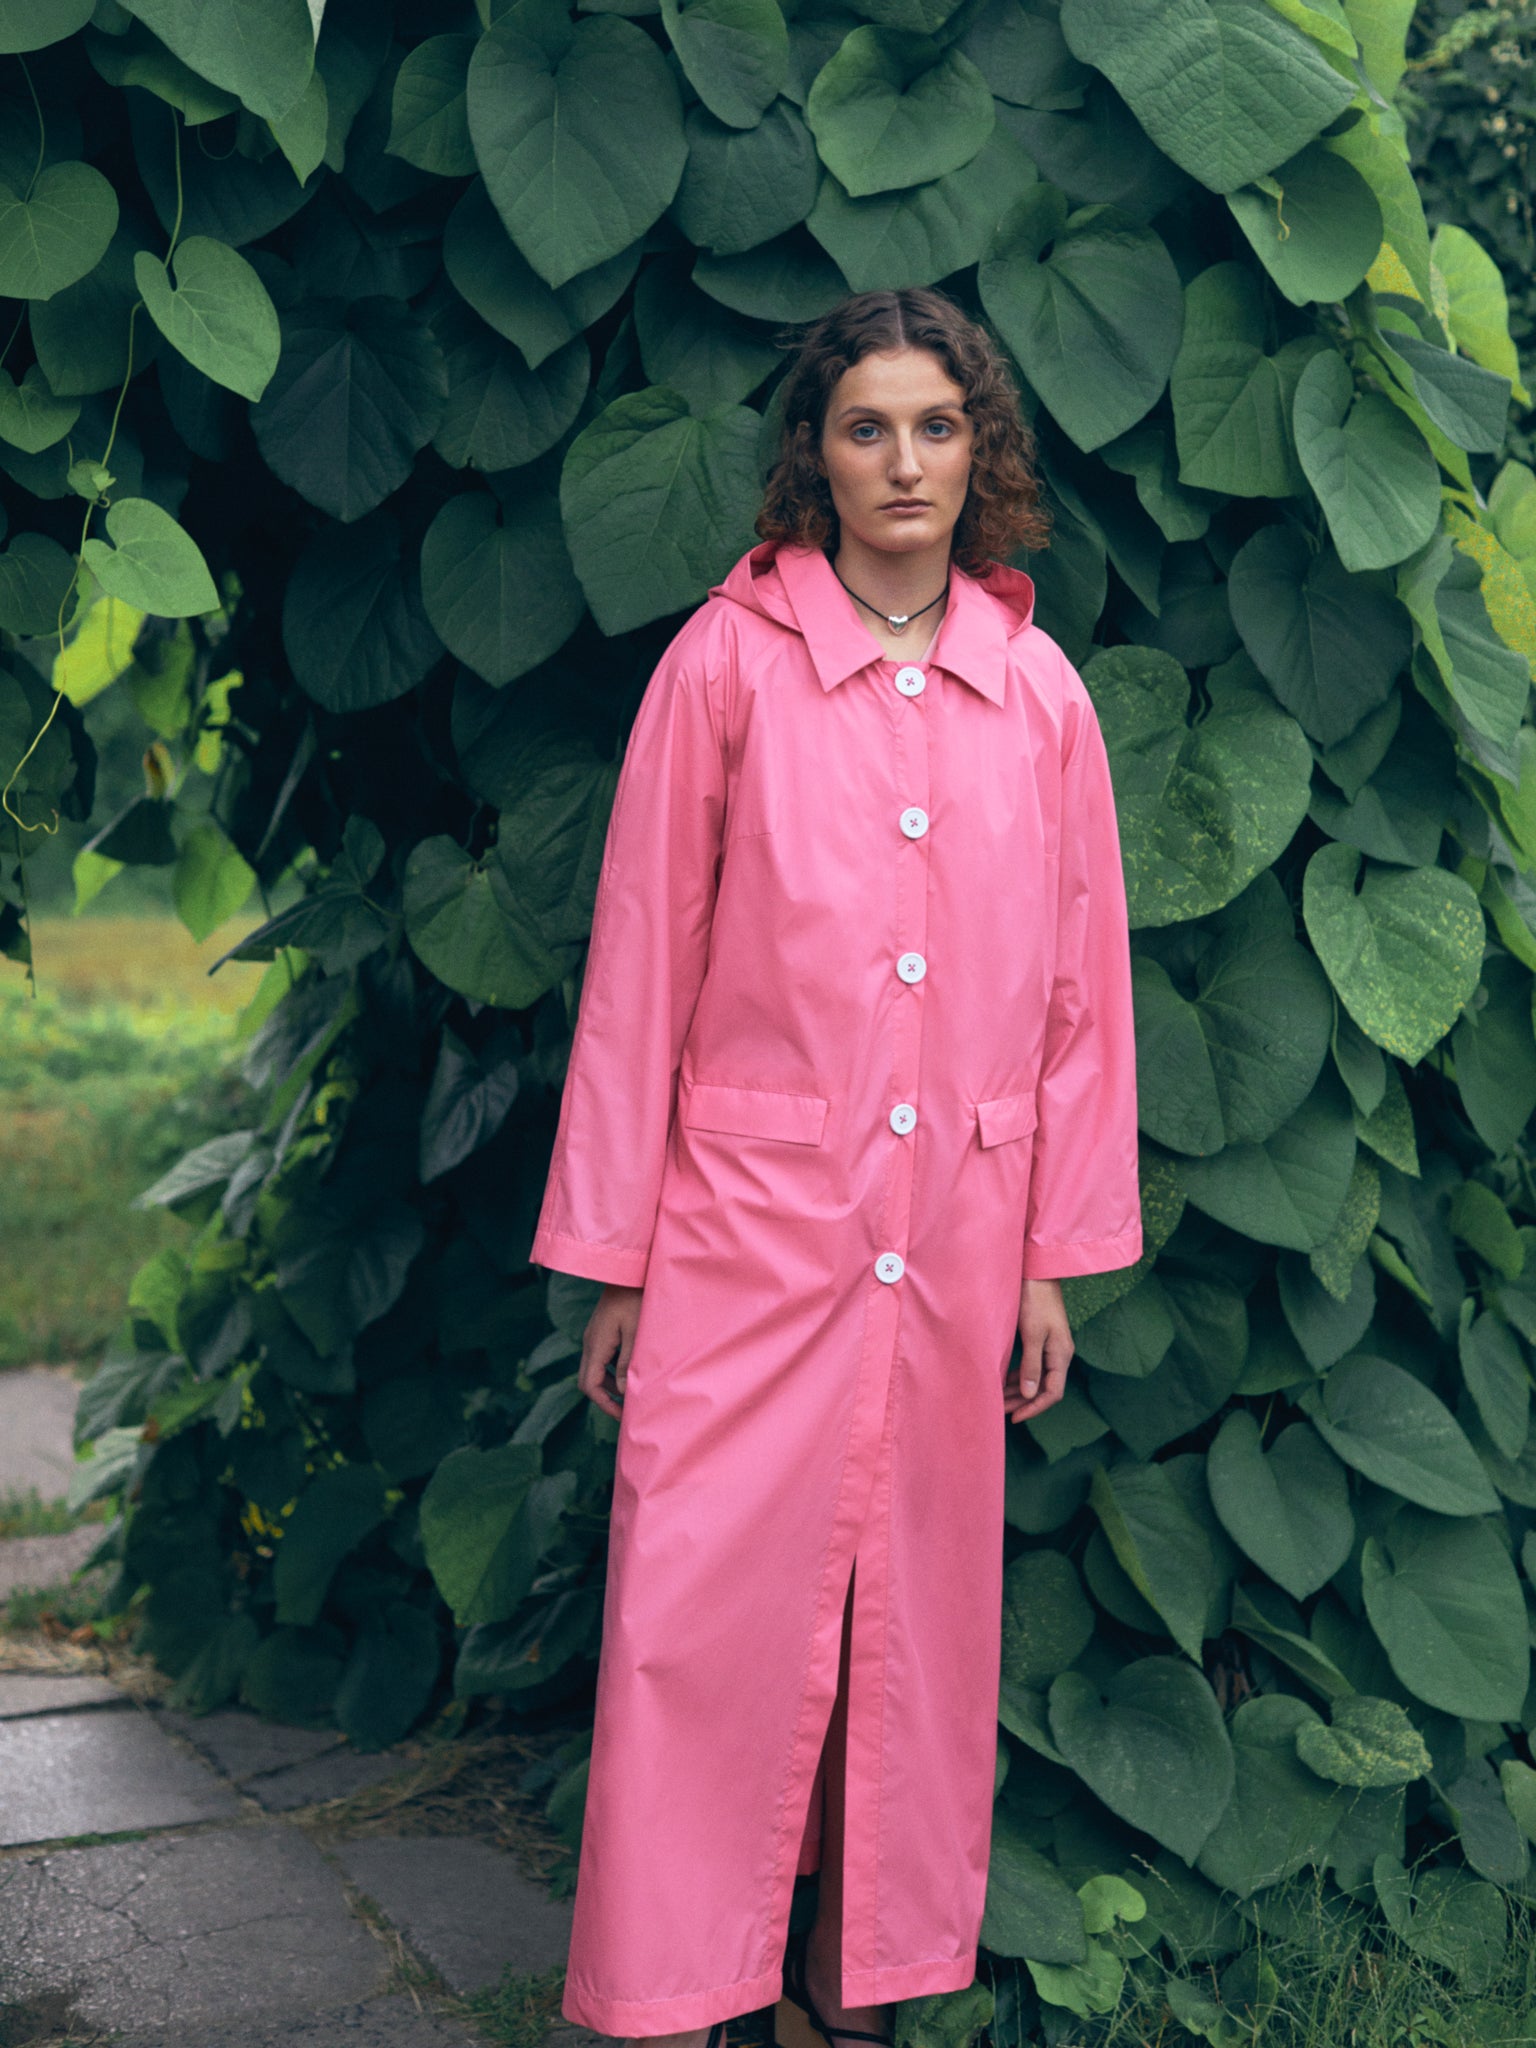 Summer raincoat with removable hood. Made from pink waterproof and breathable fabric. FORMA clothing